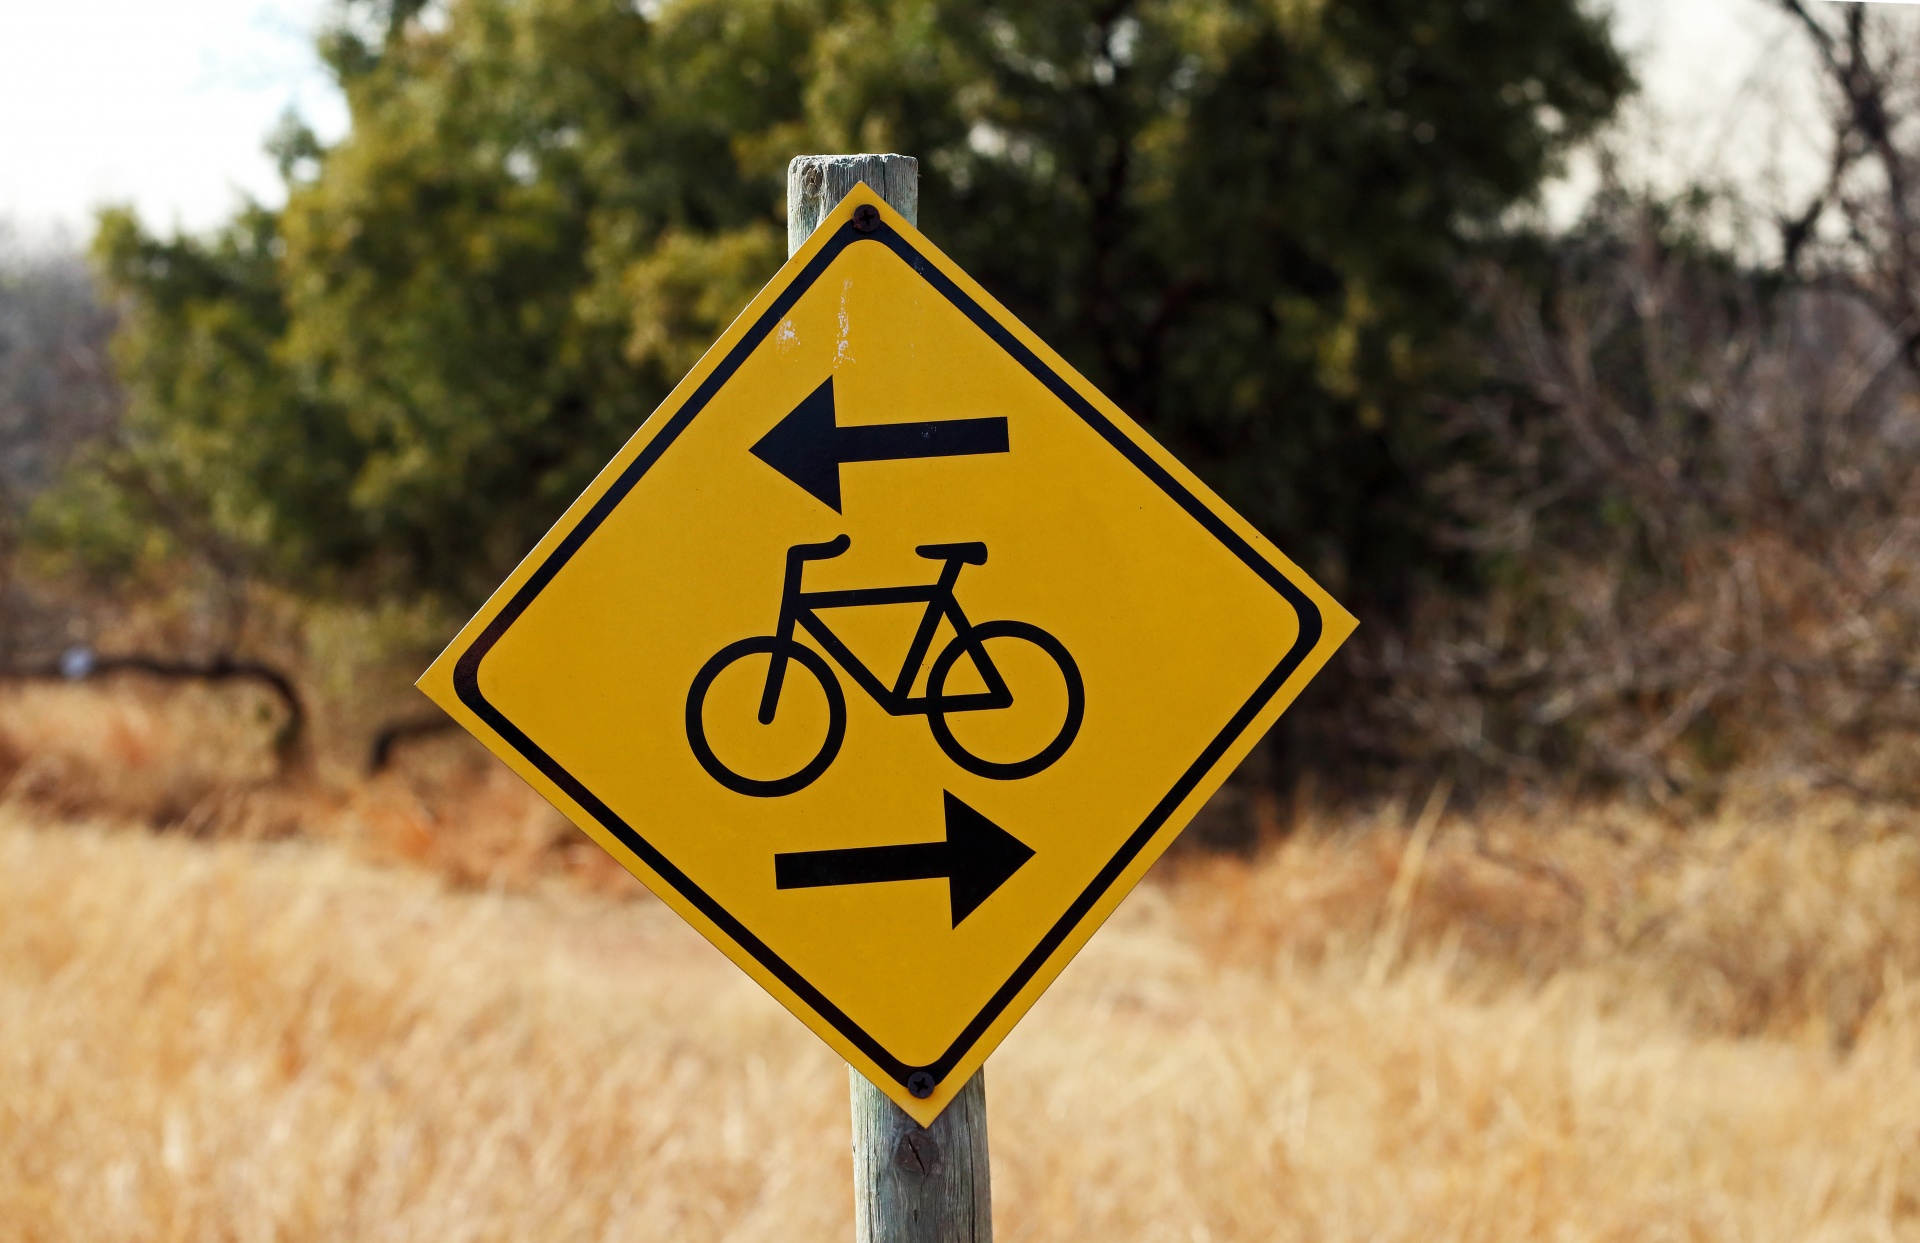 black and yellow signpost indicating a bike trail in nature